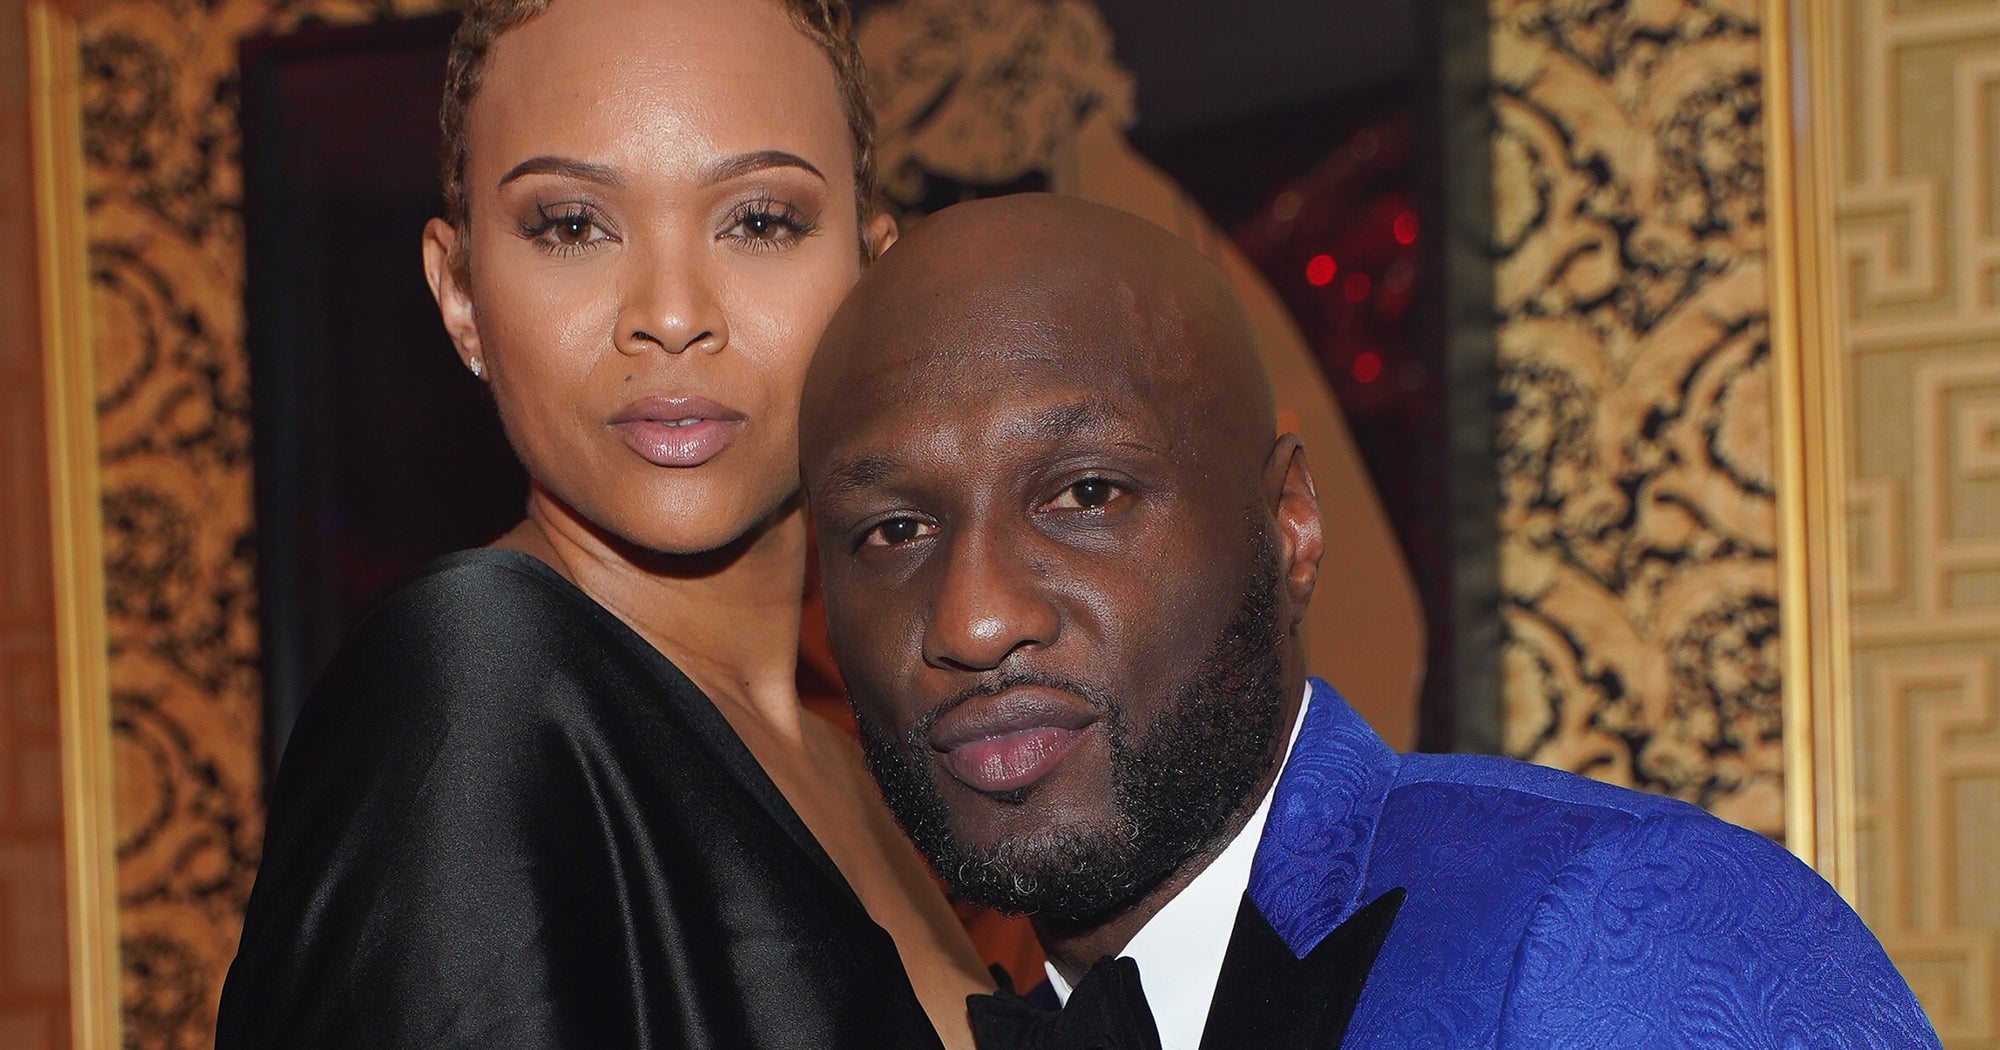 Lamar Odom Is Engaged To Sabrina Parr